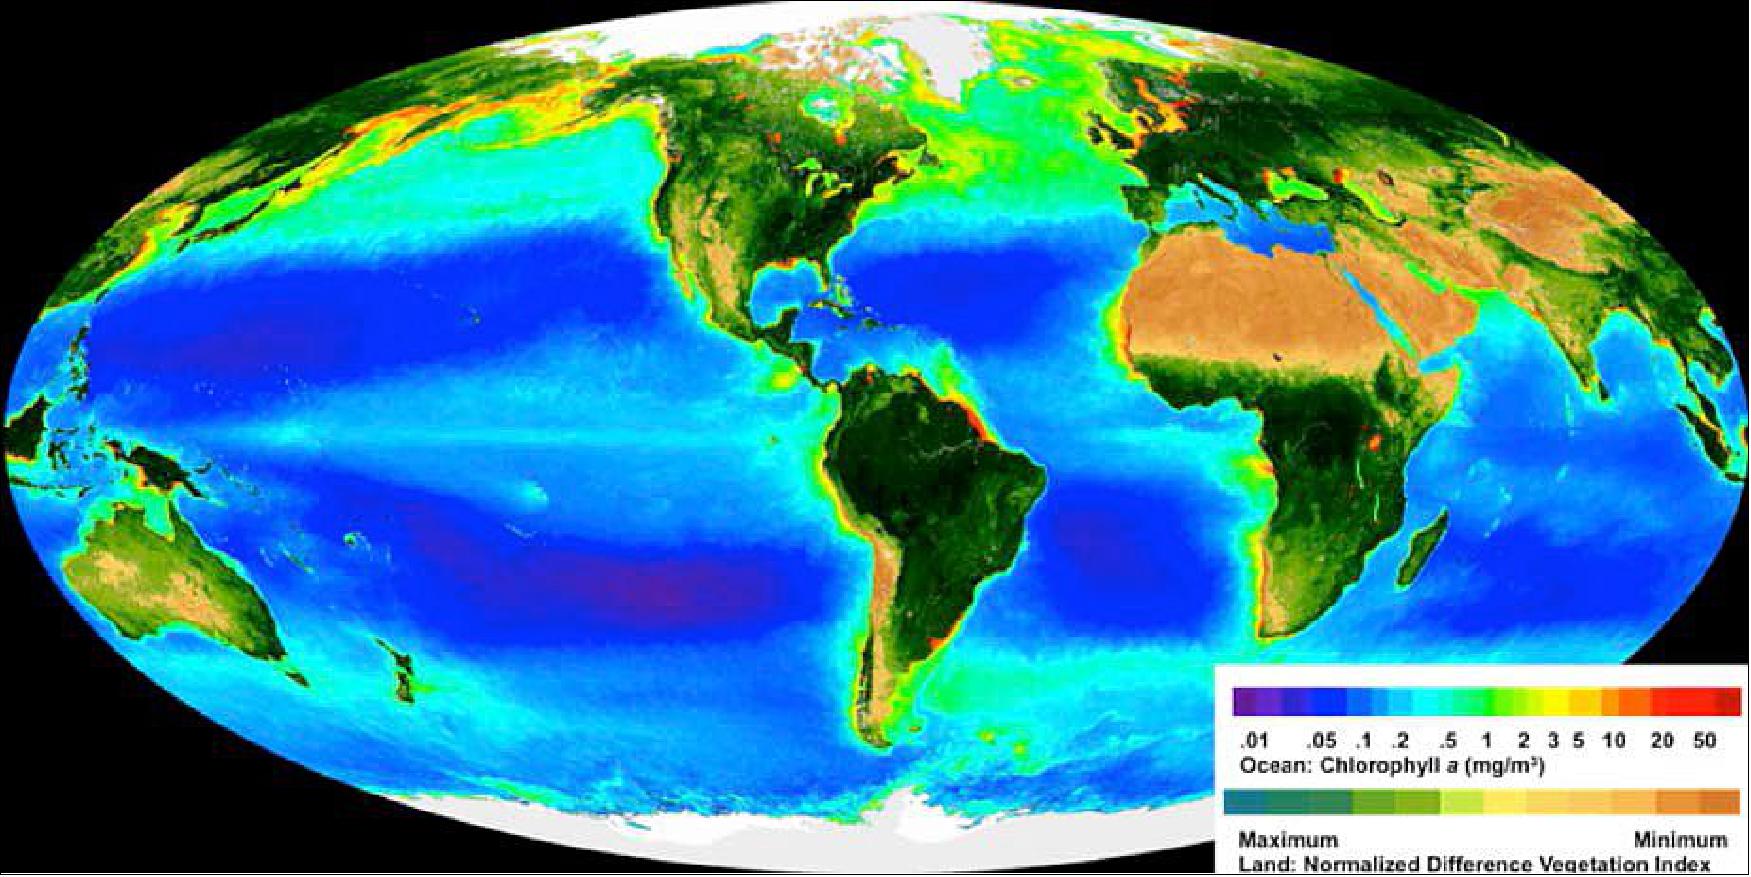 Figure 1: Global image of the Earth’s biosphere as seen by SeaWiFS. For the ocean, the colors indicate the abundances of chlorophyll-a, with purple-blue showing low abundances and green-yellow-red showing high abundance. For land, the colors show the NDVI (Normalized Difference Vegetation Index), with brown and green indicating arid and lush regions, respectively. NASA pioneered the field of global ocean color observations with the SeaWIFS satellite sensor from 1997 to 2010 (image credit: NASA)